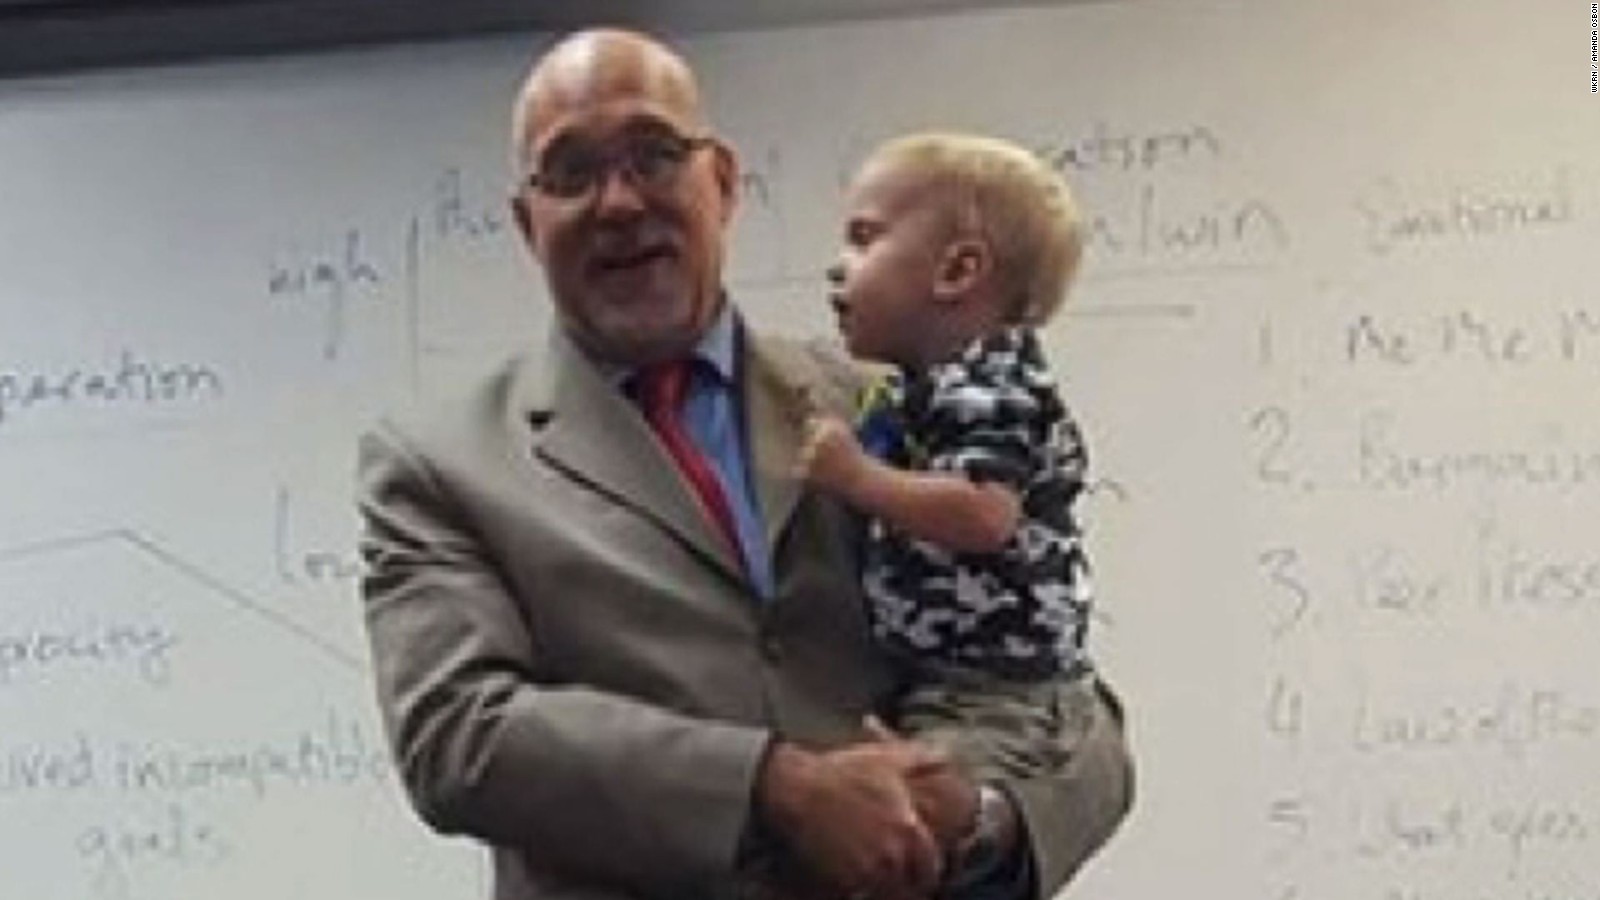 Professor holds single mom's son during class, brings her to tears